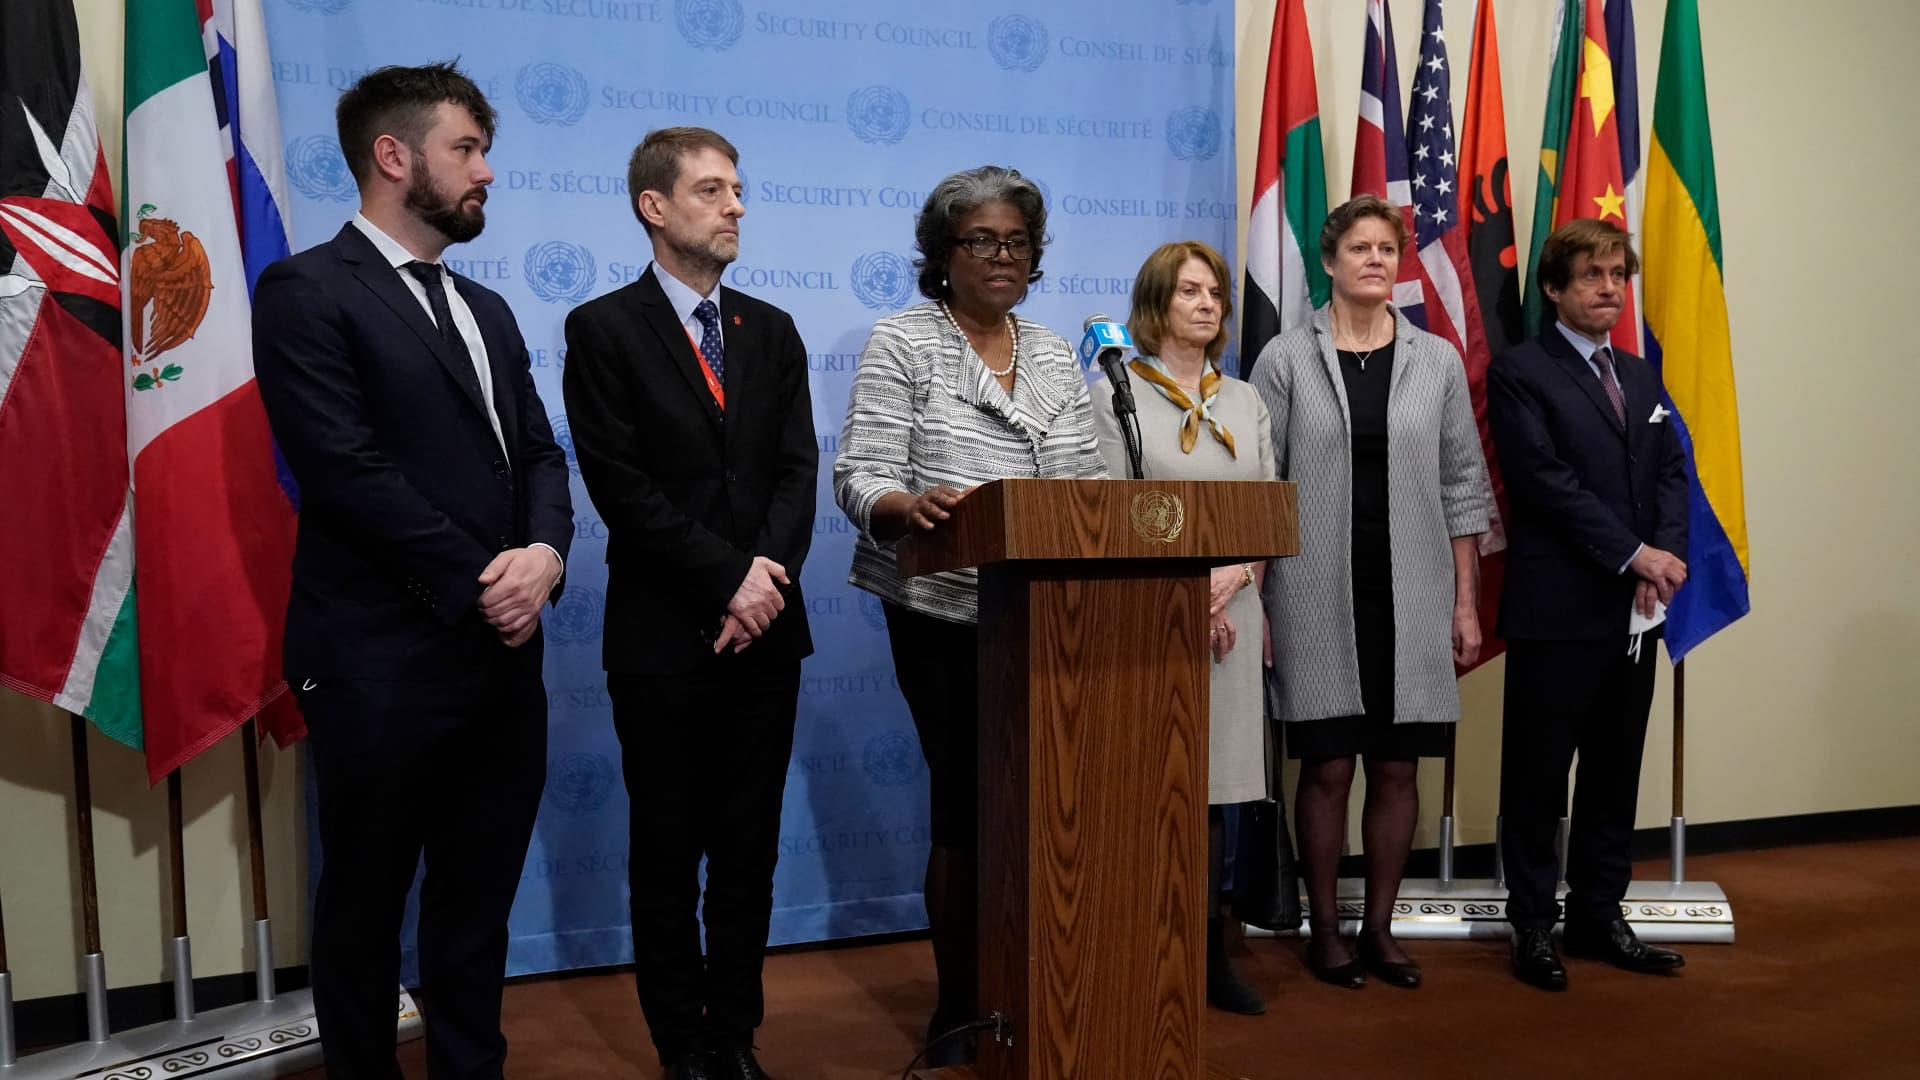 Linda Thomas-Greenfield, US Ambassador to the United Nations delivers a joint statement on behalf of Albania, France, Ireland, Norway, UK, and the United States before a meeting of the UN Security Council on threats to international peace and security, March 18 2022 in New York.